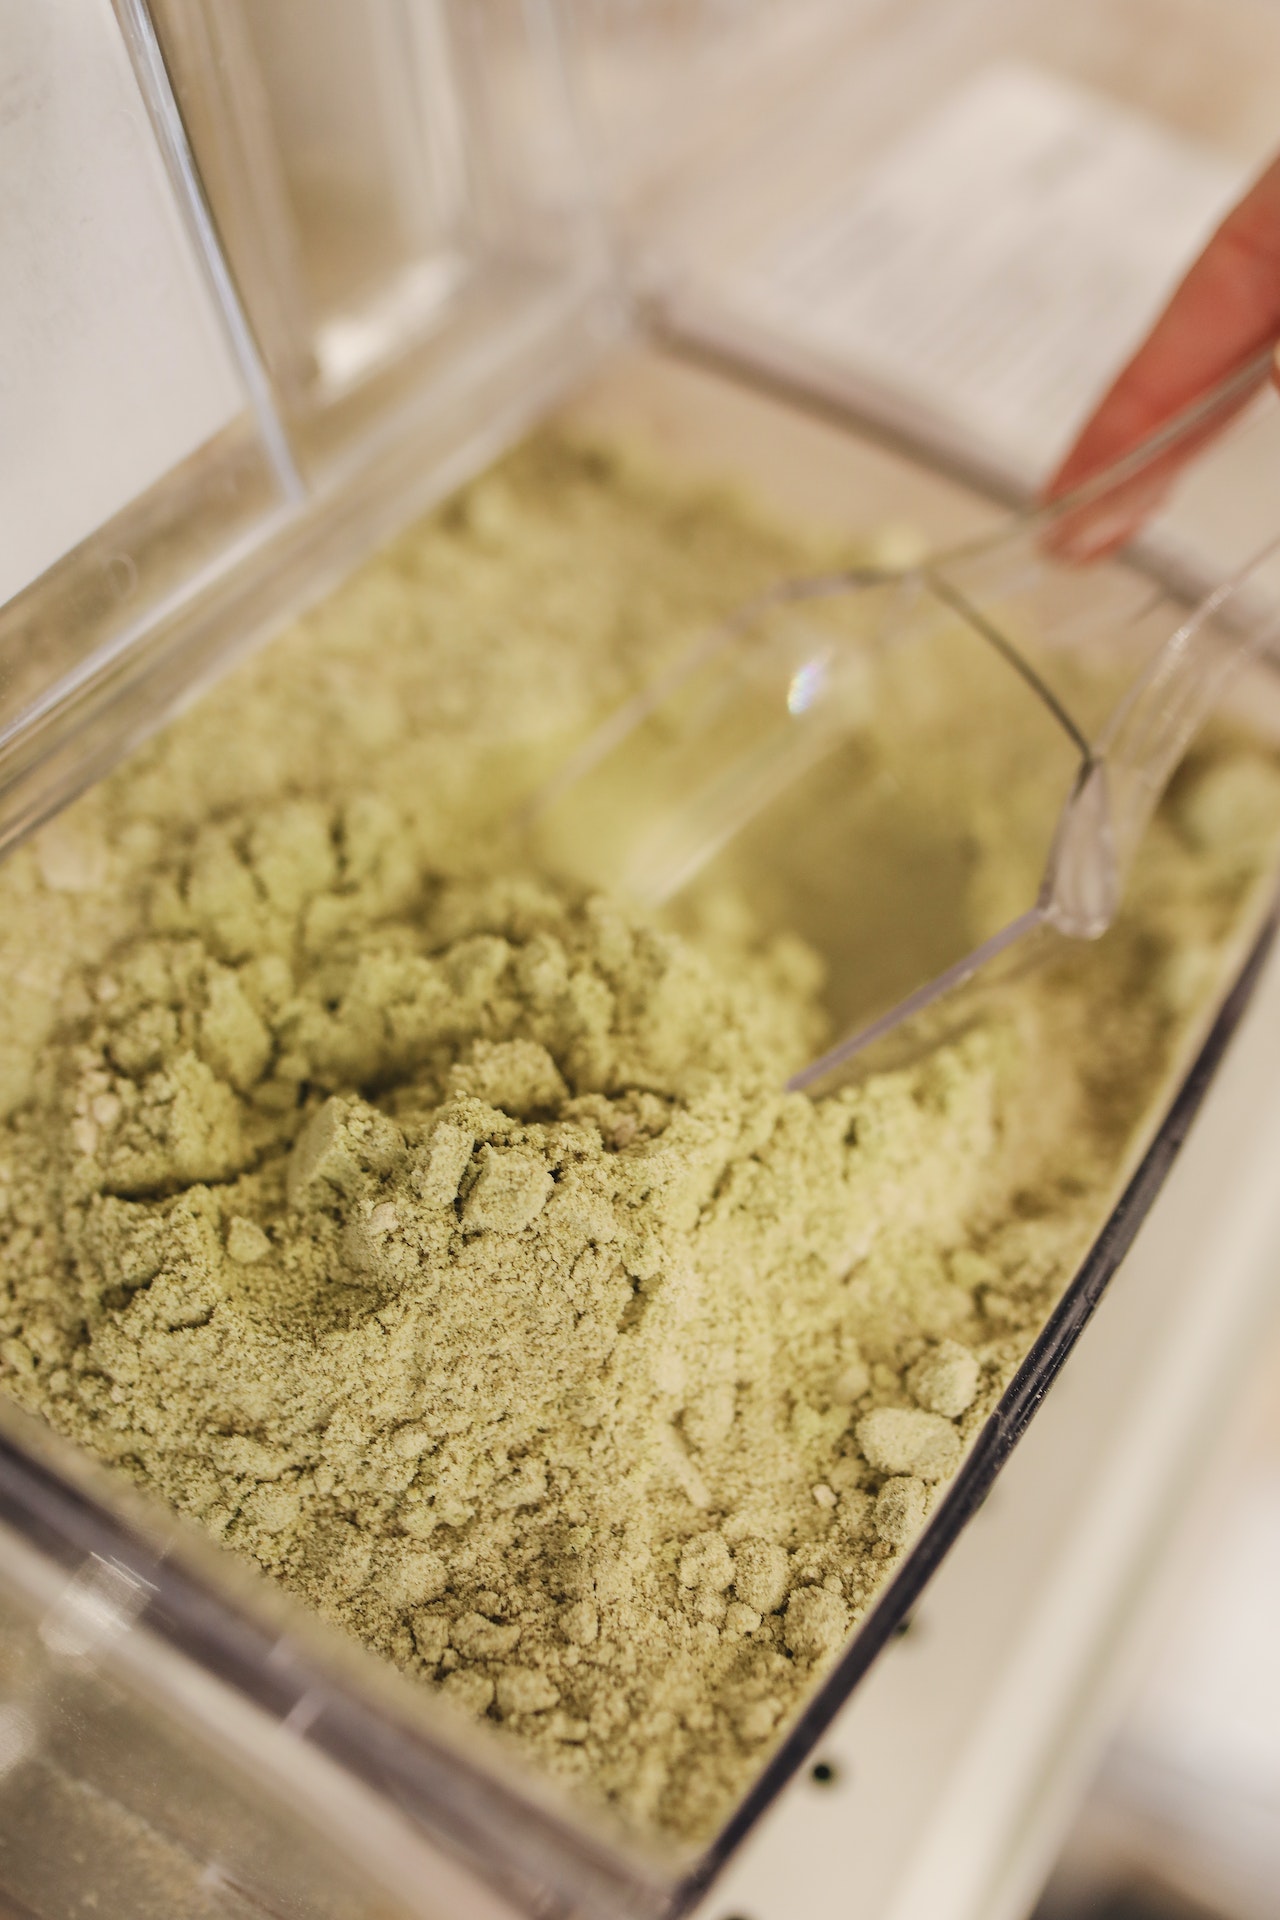 Photo by Polina Tankilevitch: https://www.pexels.com/photo/photo-of-matcha-powder-in-a-container-3735171/